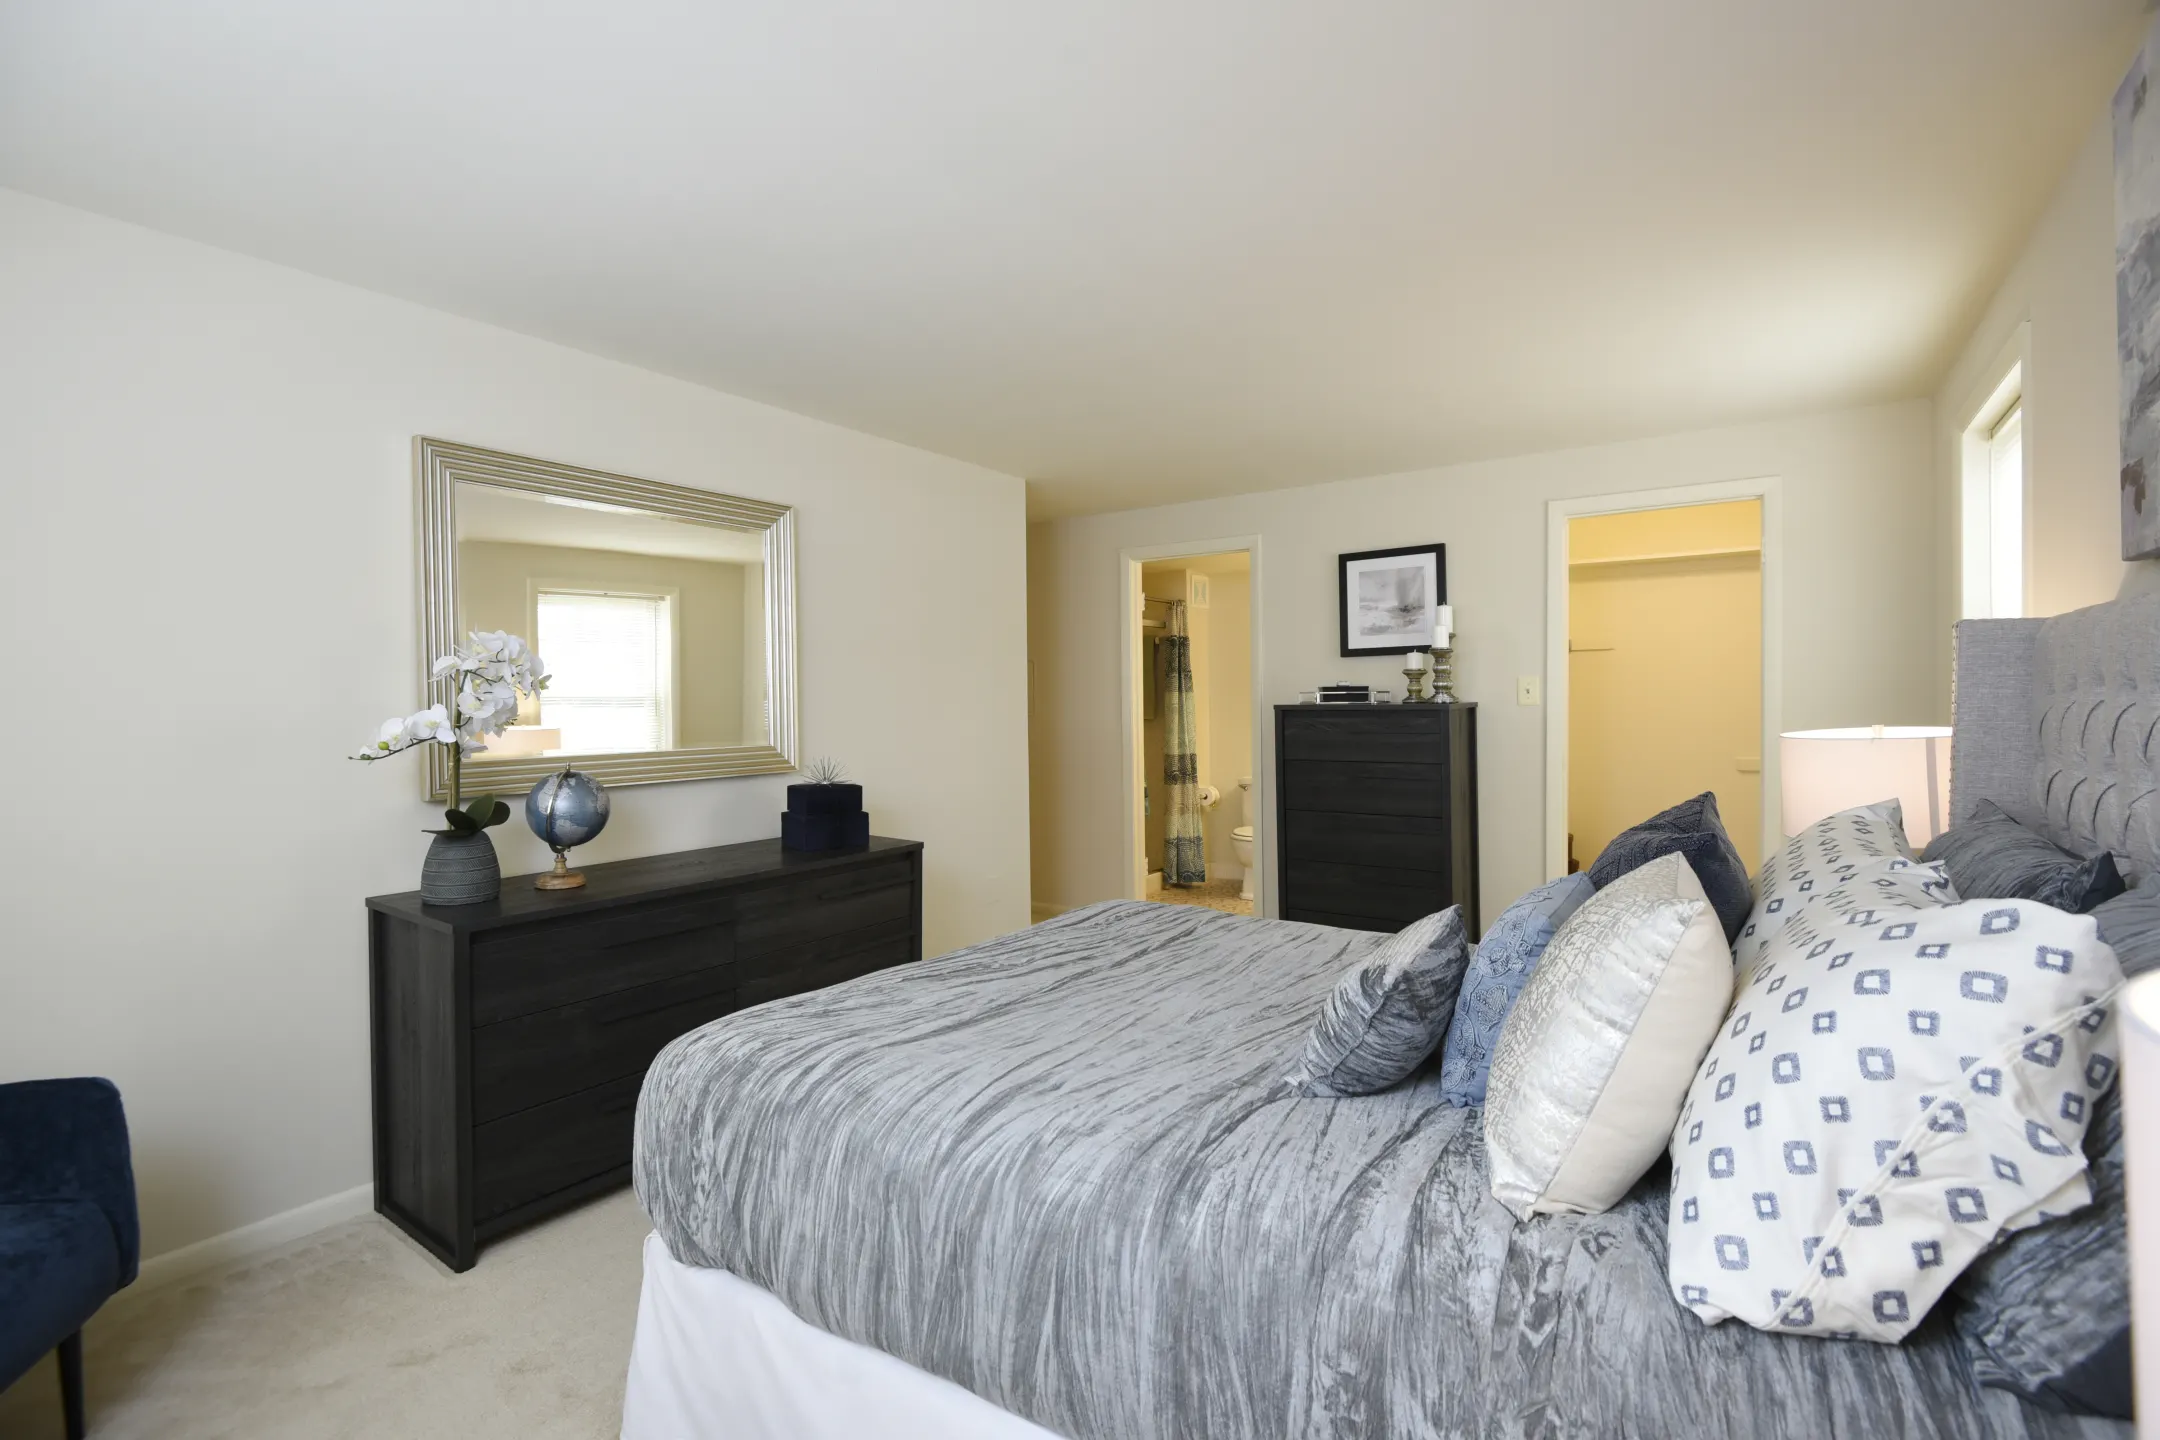 Bedroom - Cromwell Valley Apartments - Towson, MD